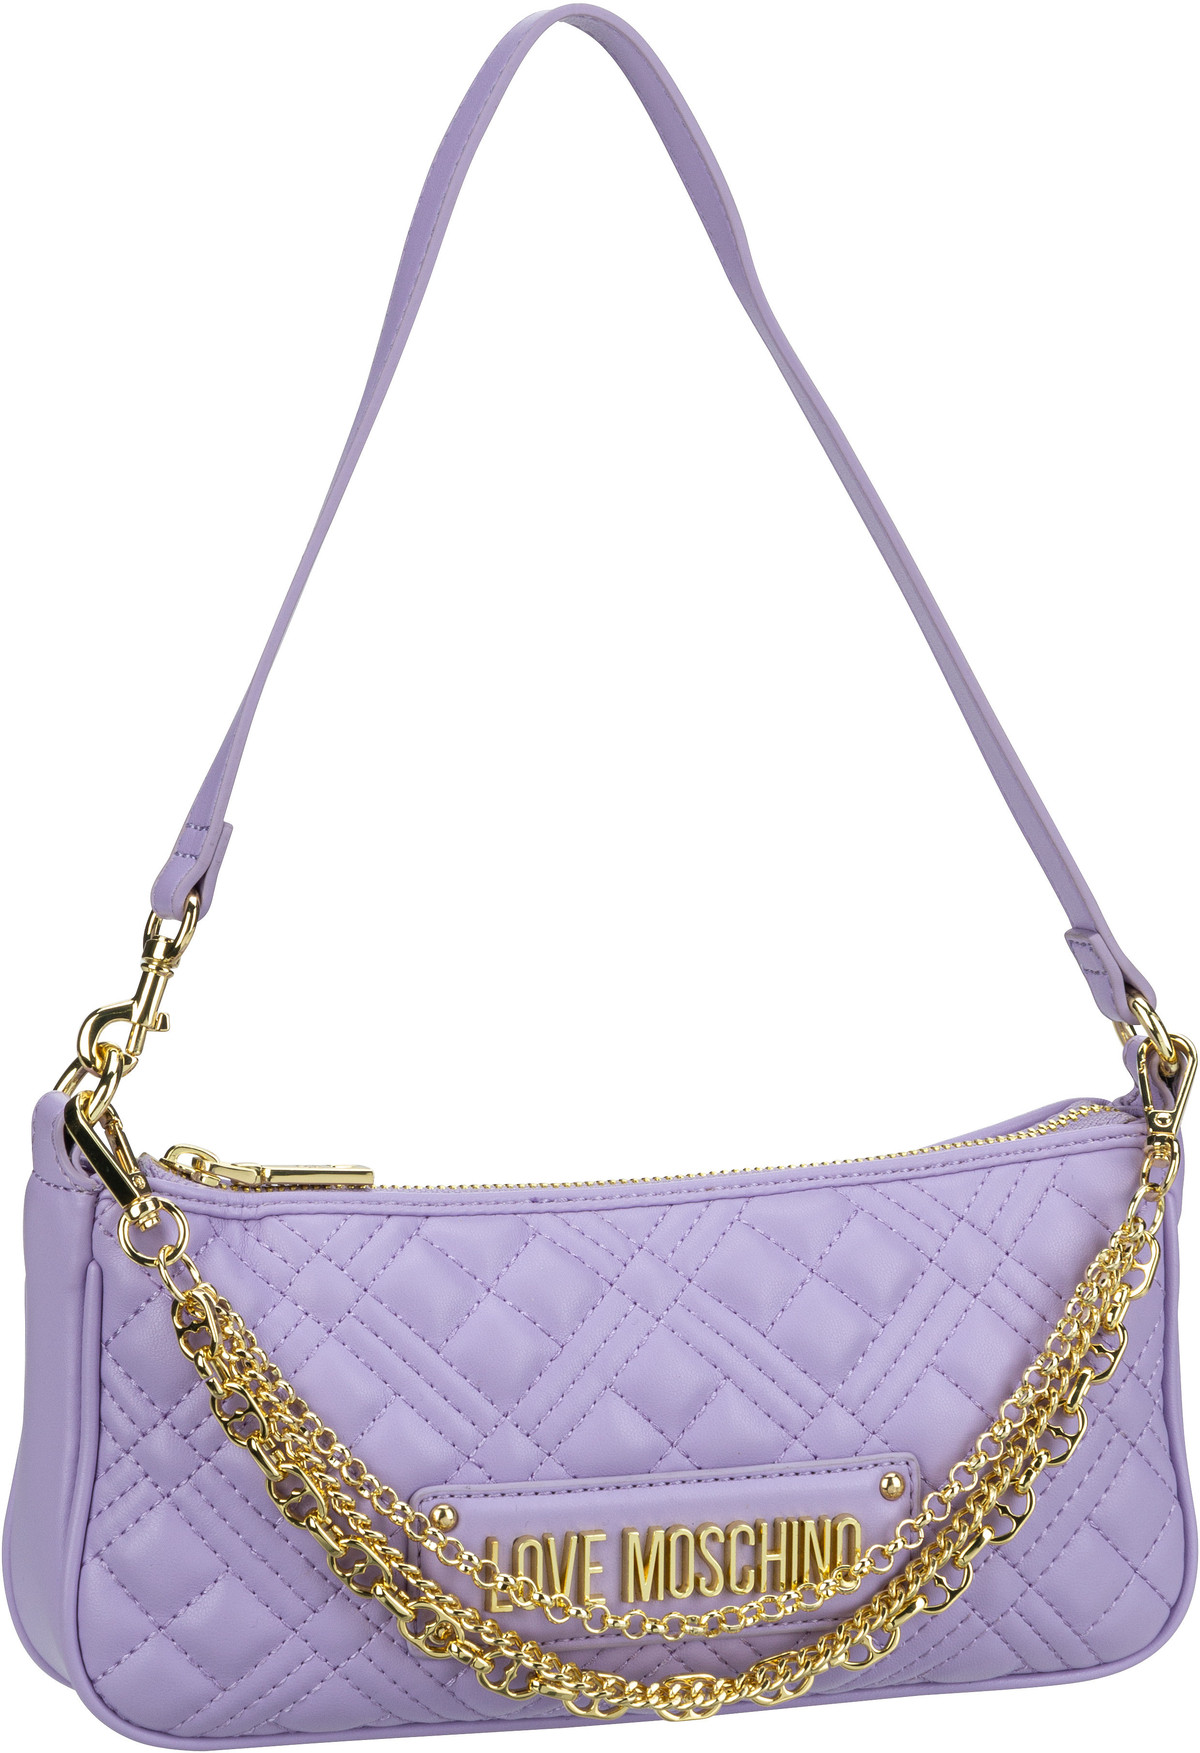 love moschino -  Schultertasche Multi Chain Quilted Small Shoulder Bag 4258 Lilac (1.2 Liter)